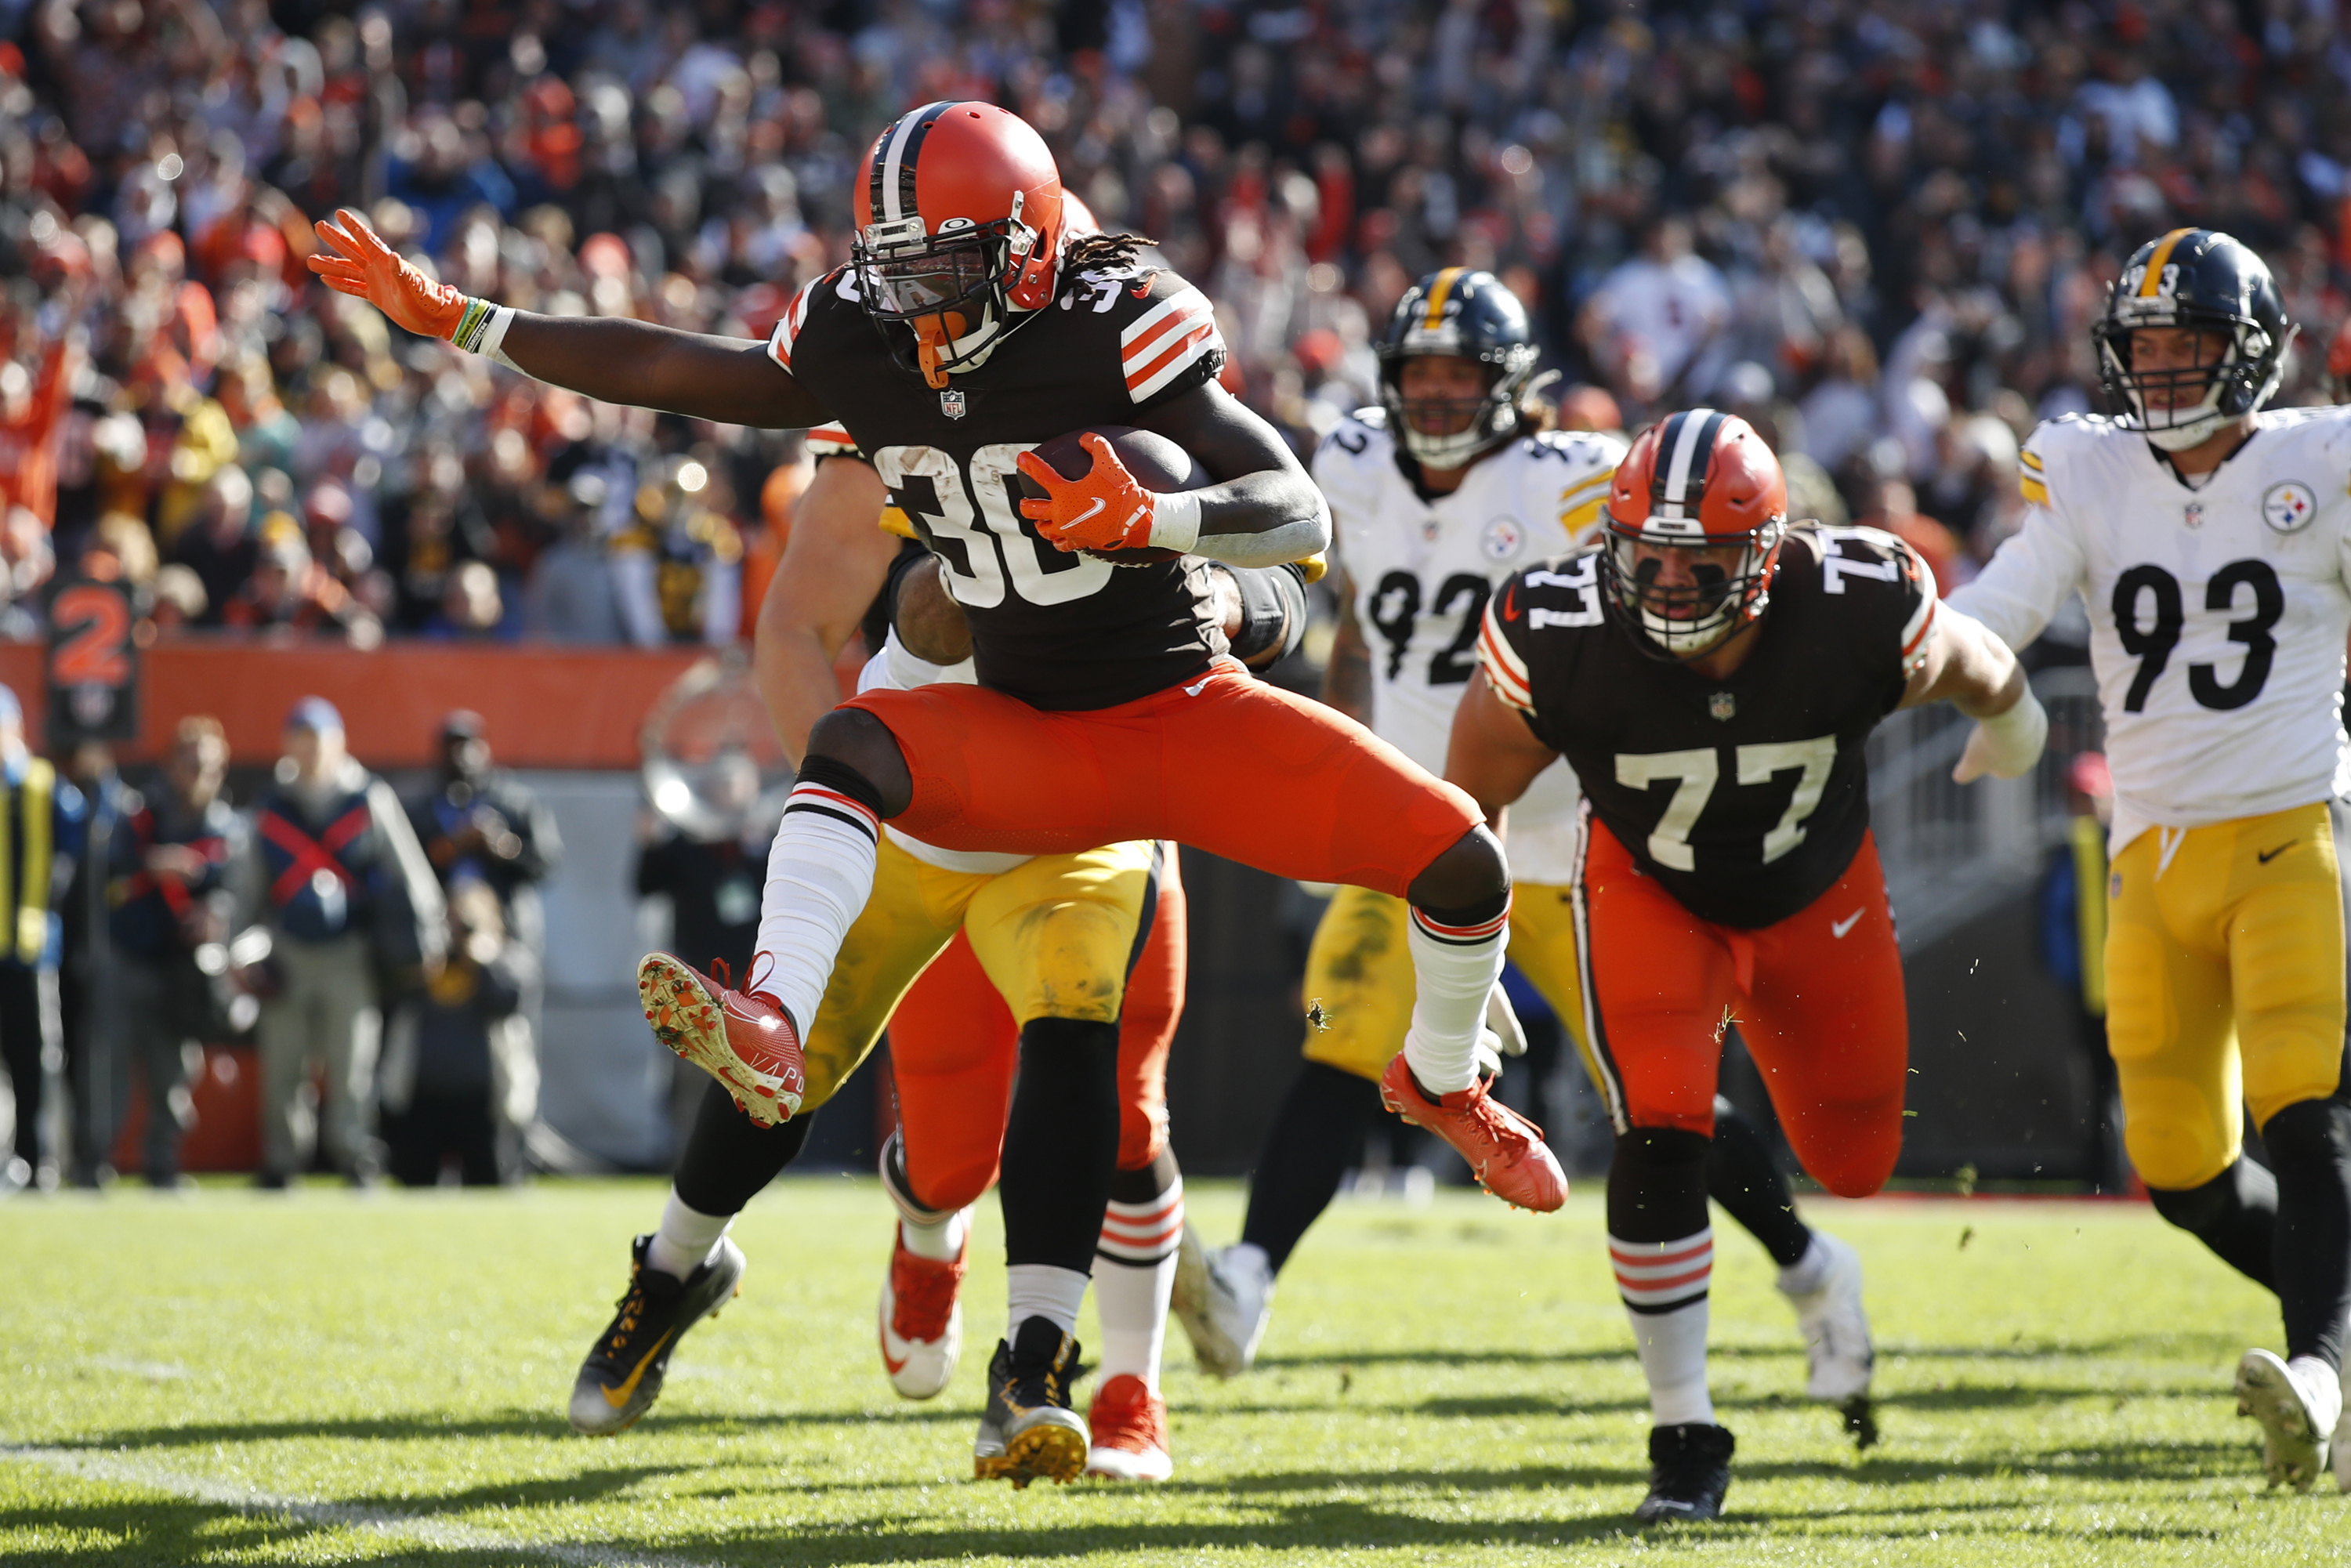 5 Cleveland Browns players to watch against the Patriots on Sunday